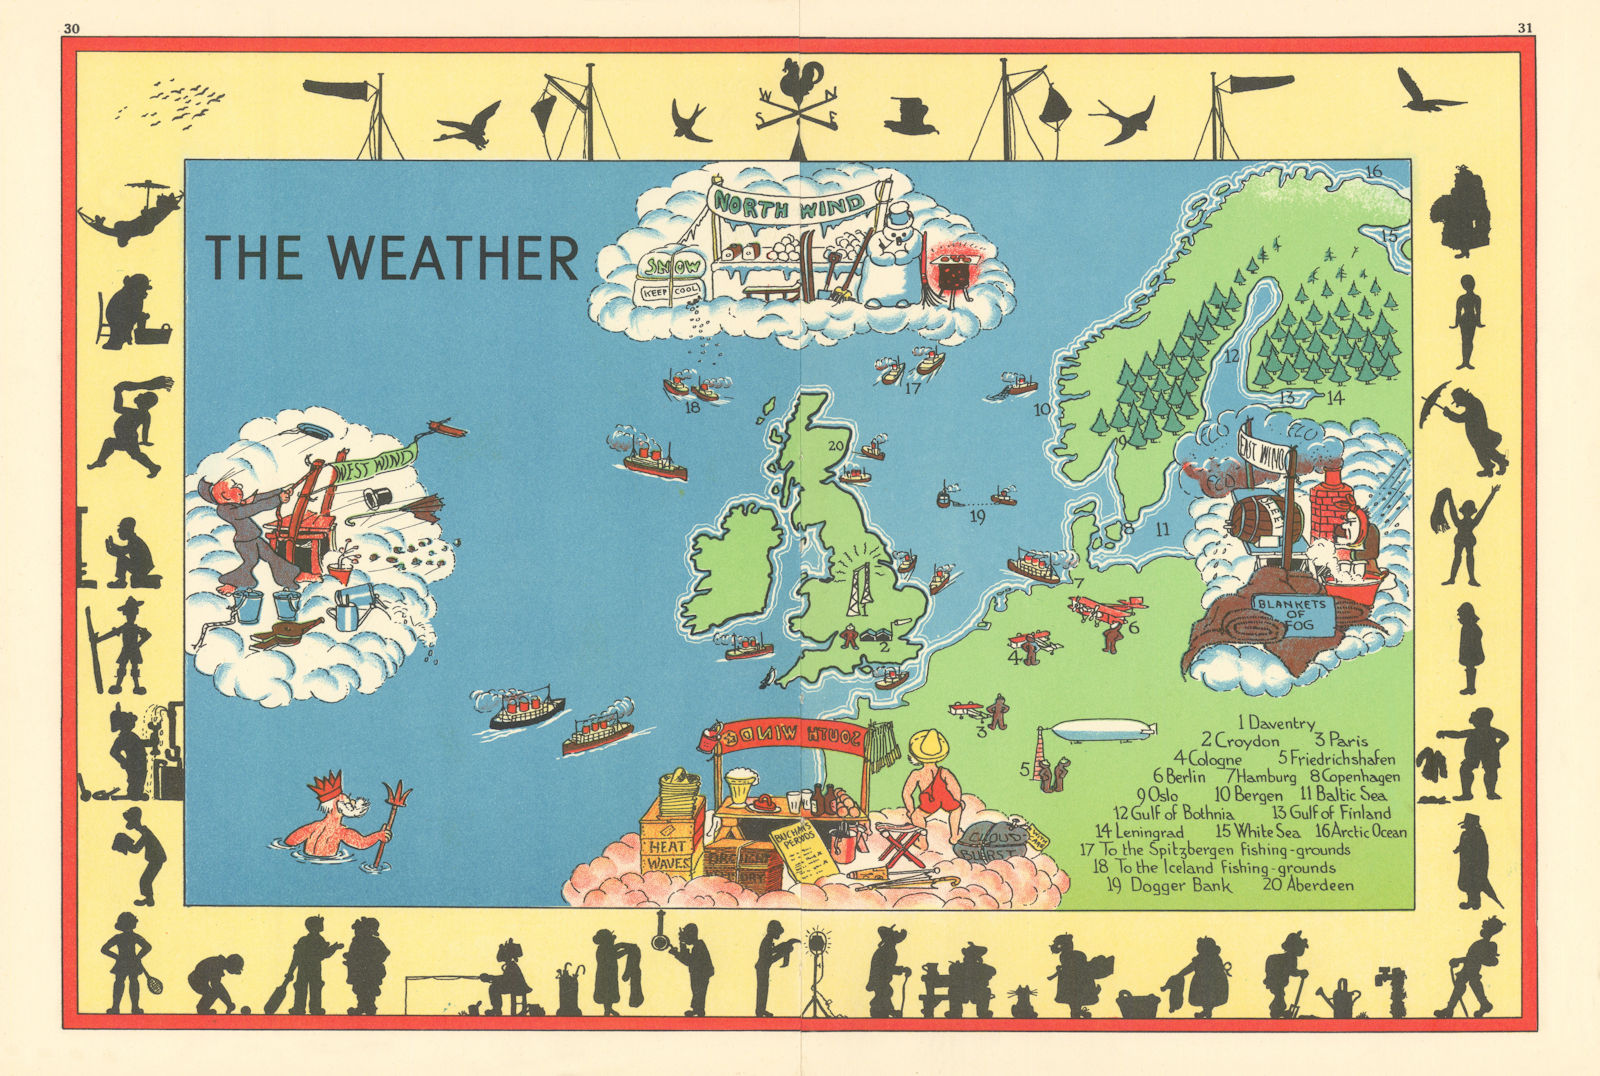 "The Weather". Northern Europe pictorial map. Daventry transmitter. ALNWICK 1937